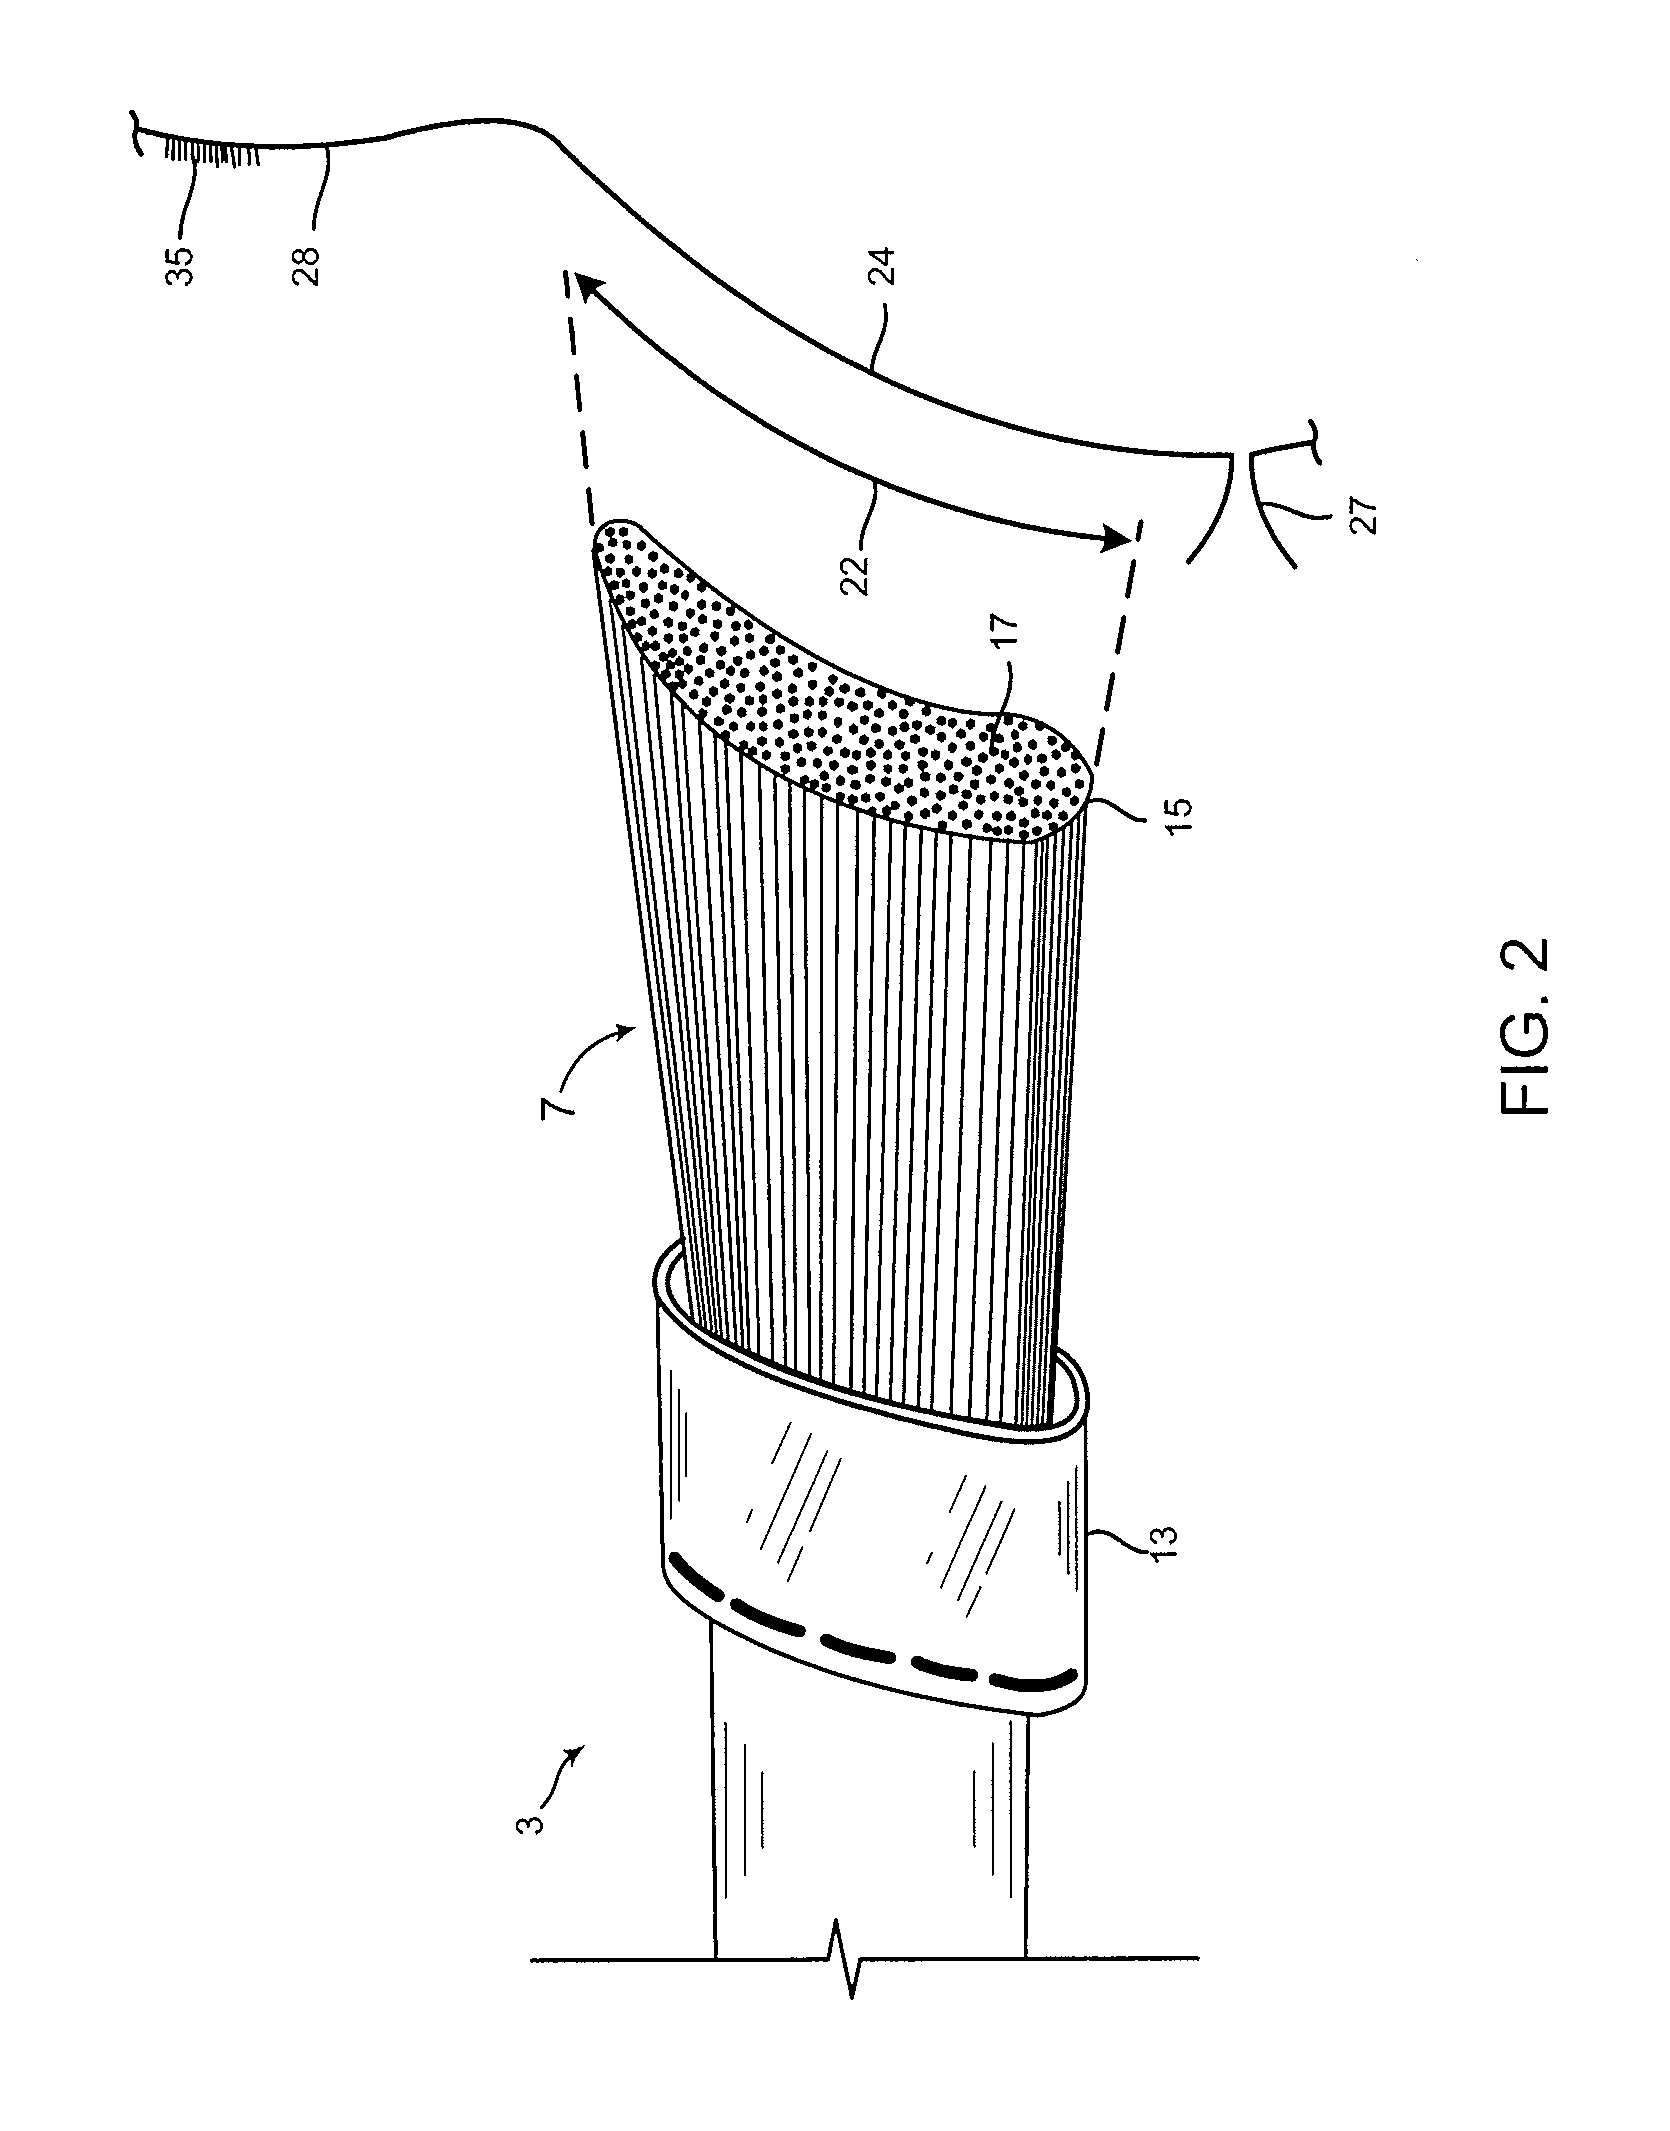 Contoured eye shadow applicator system and make-up method